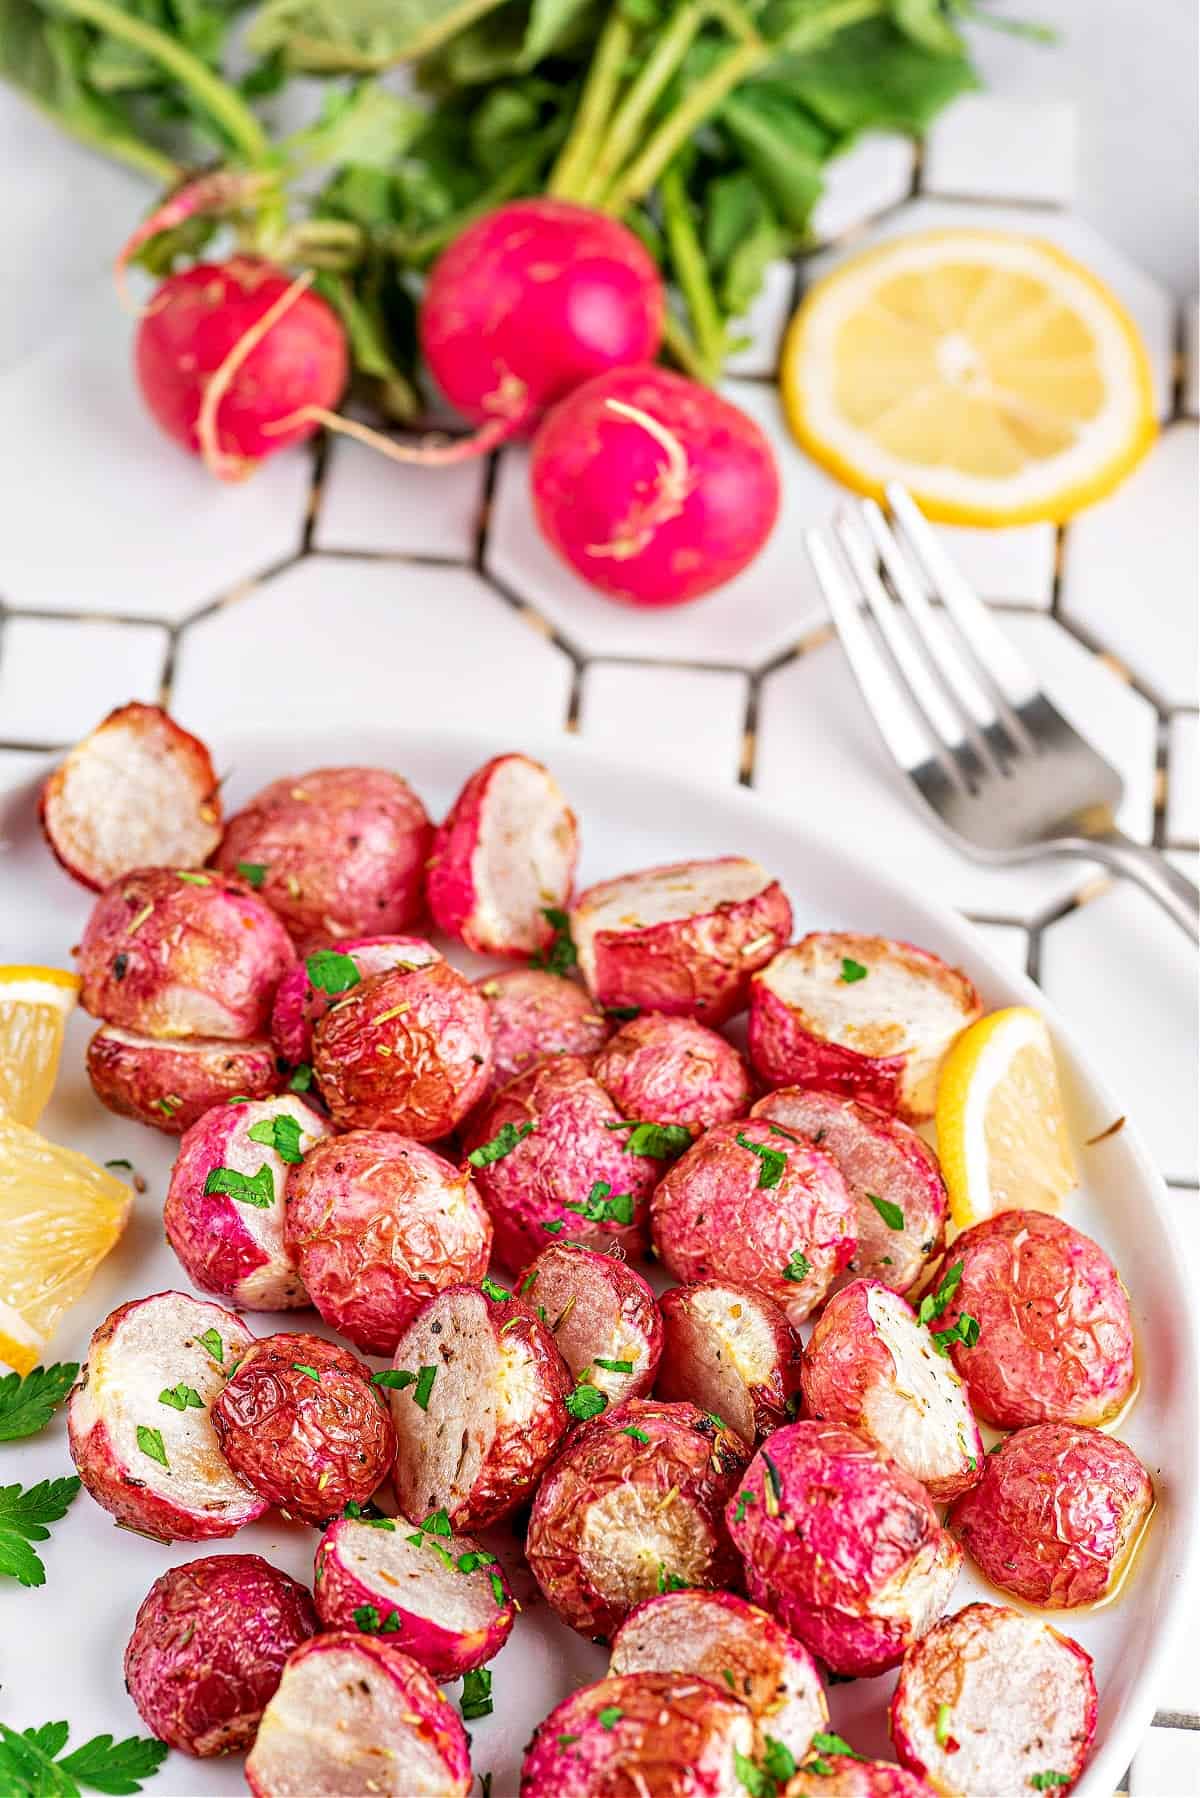 air fryer roasted radishes on a plate with lemon slices